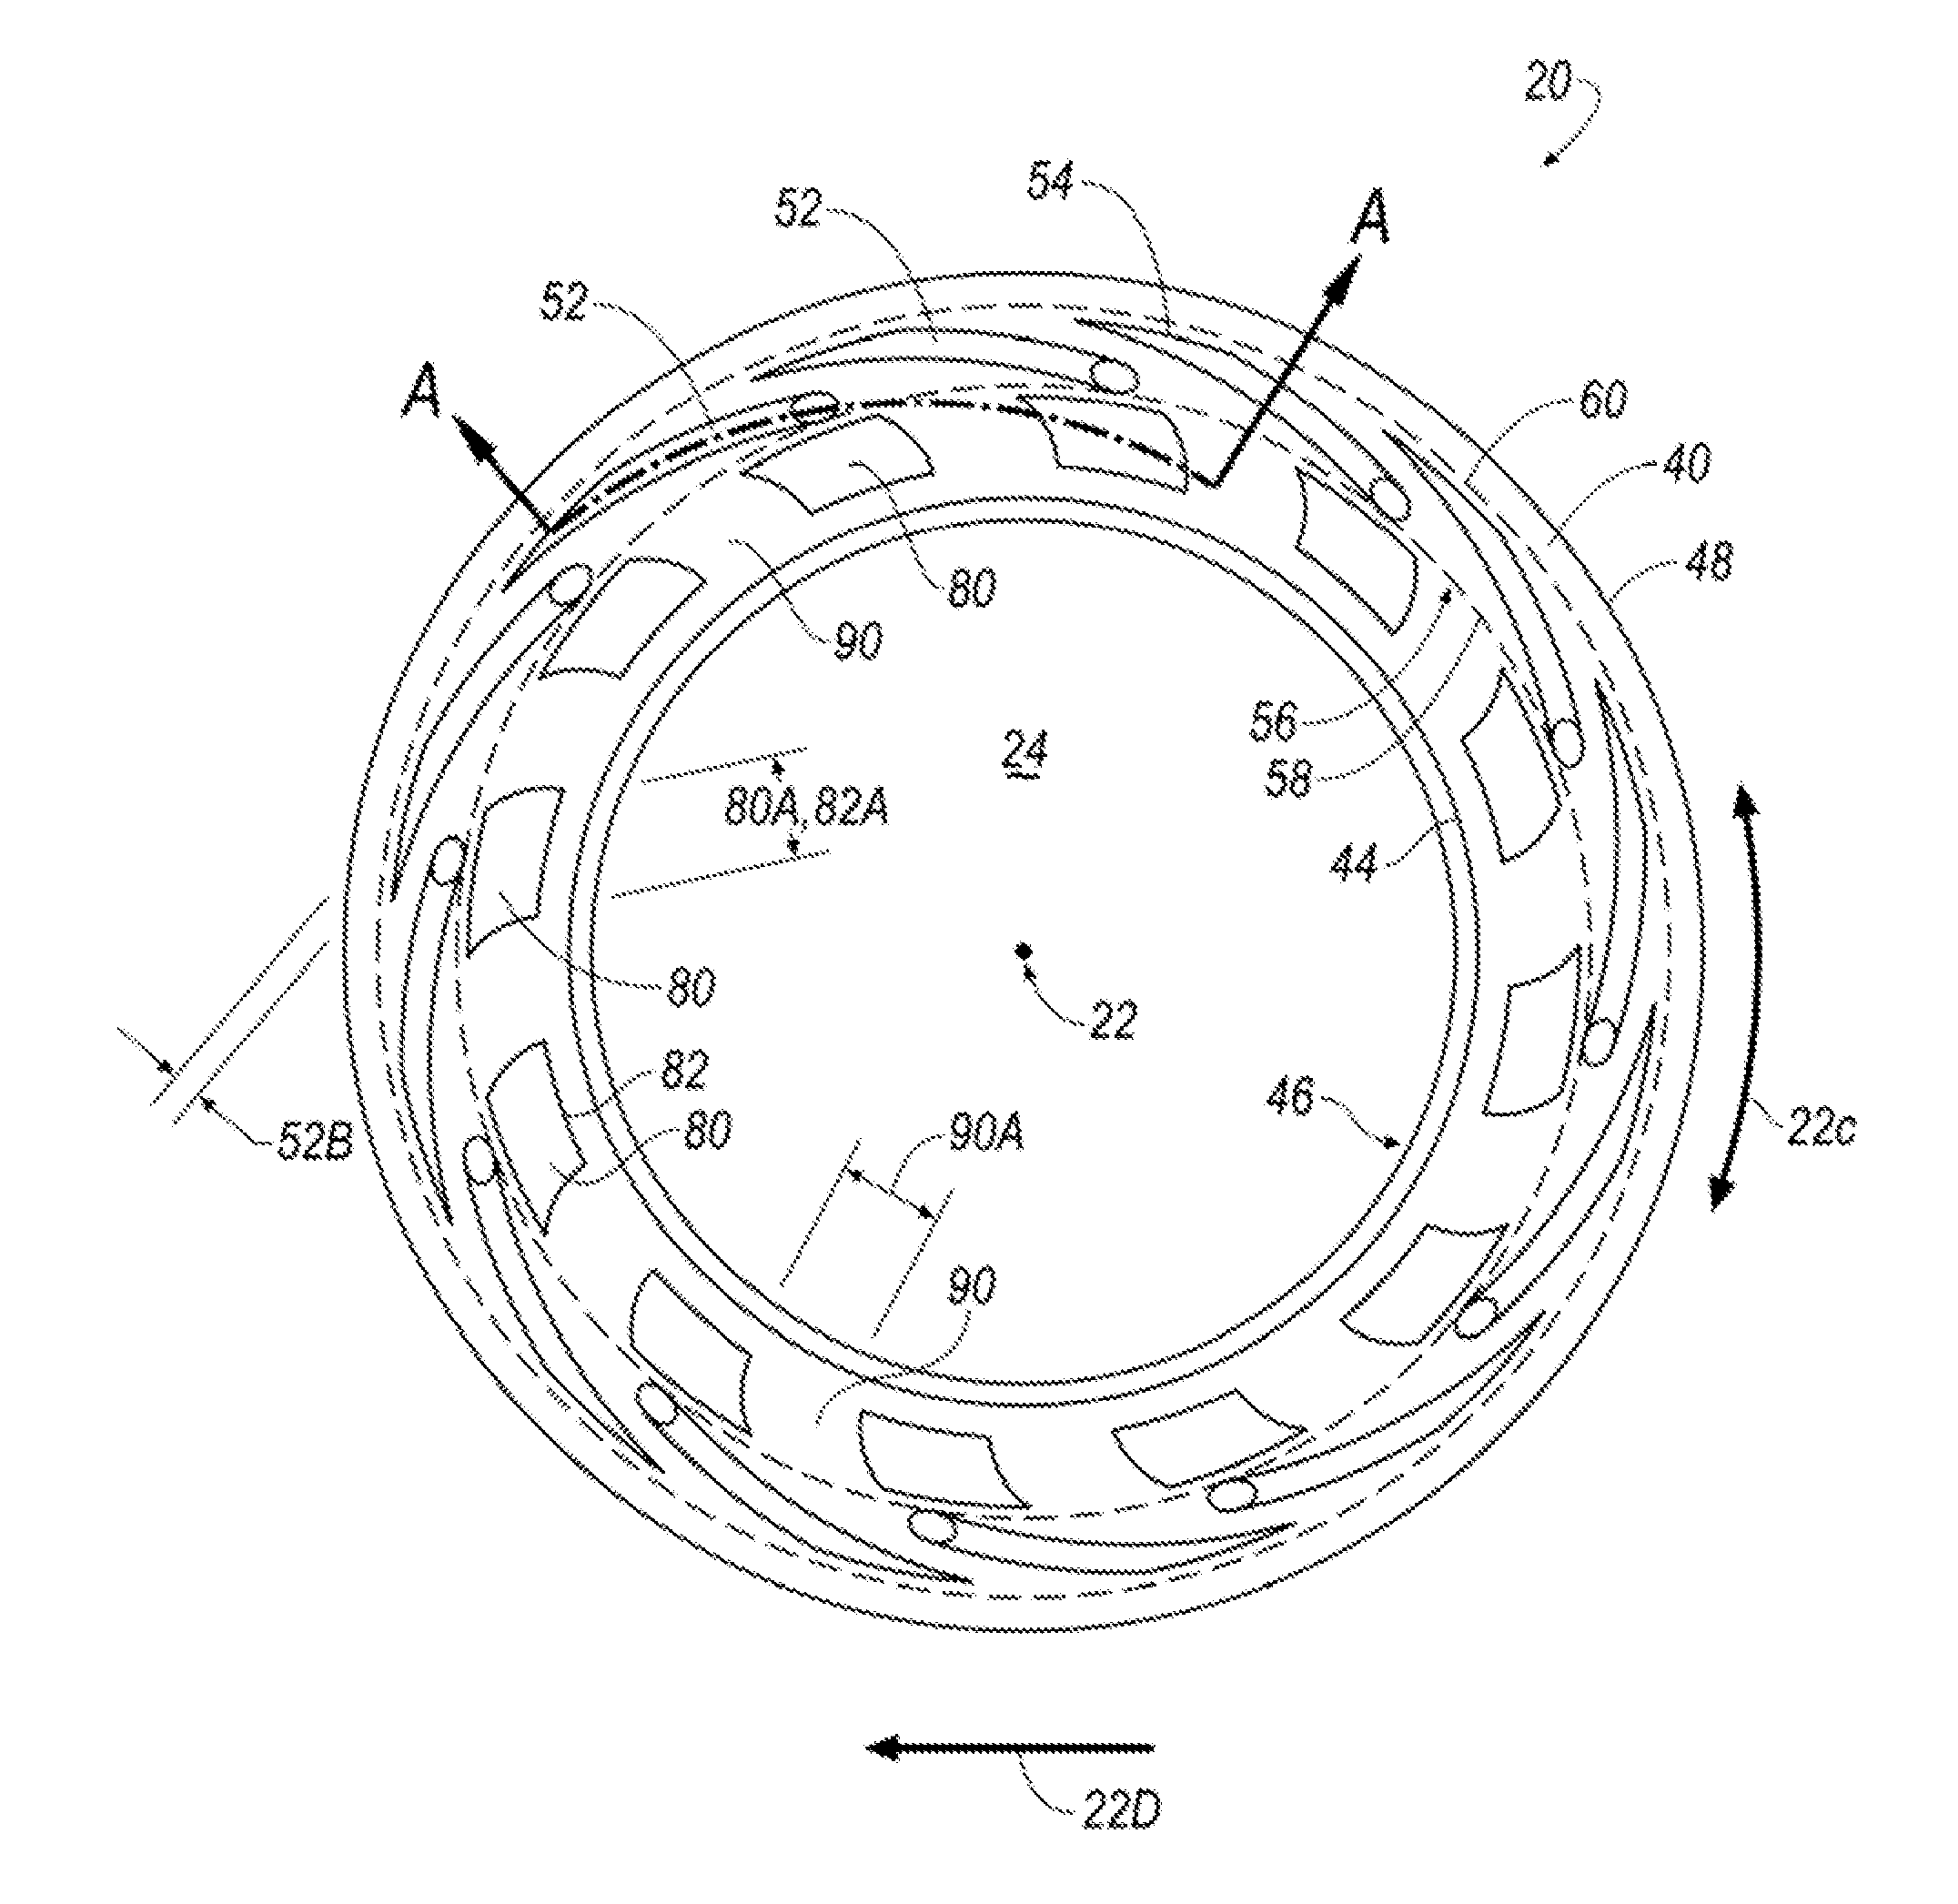 Hydrodynamic mating ring with integrated groove inlet pressure control